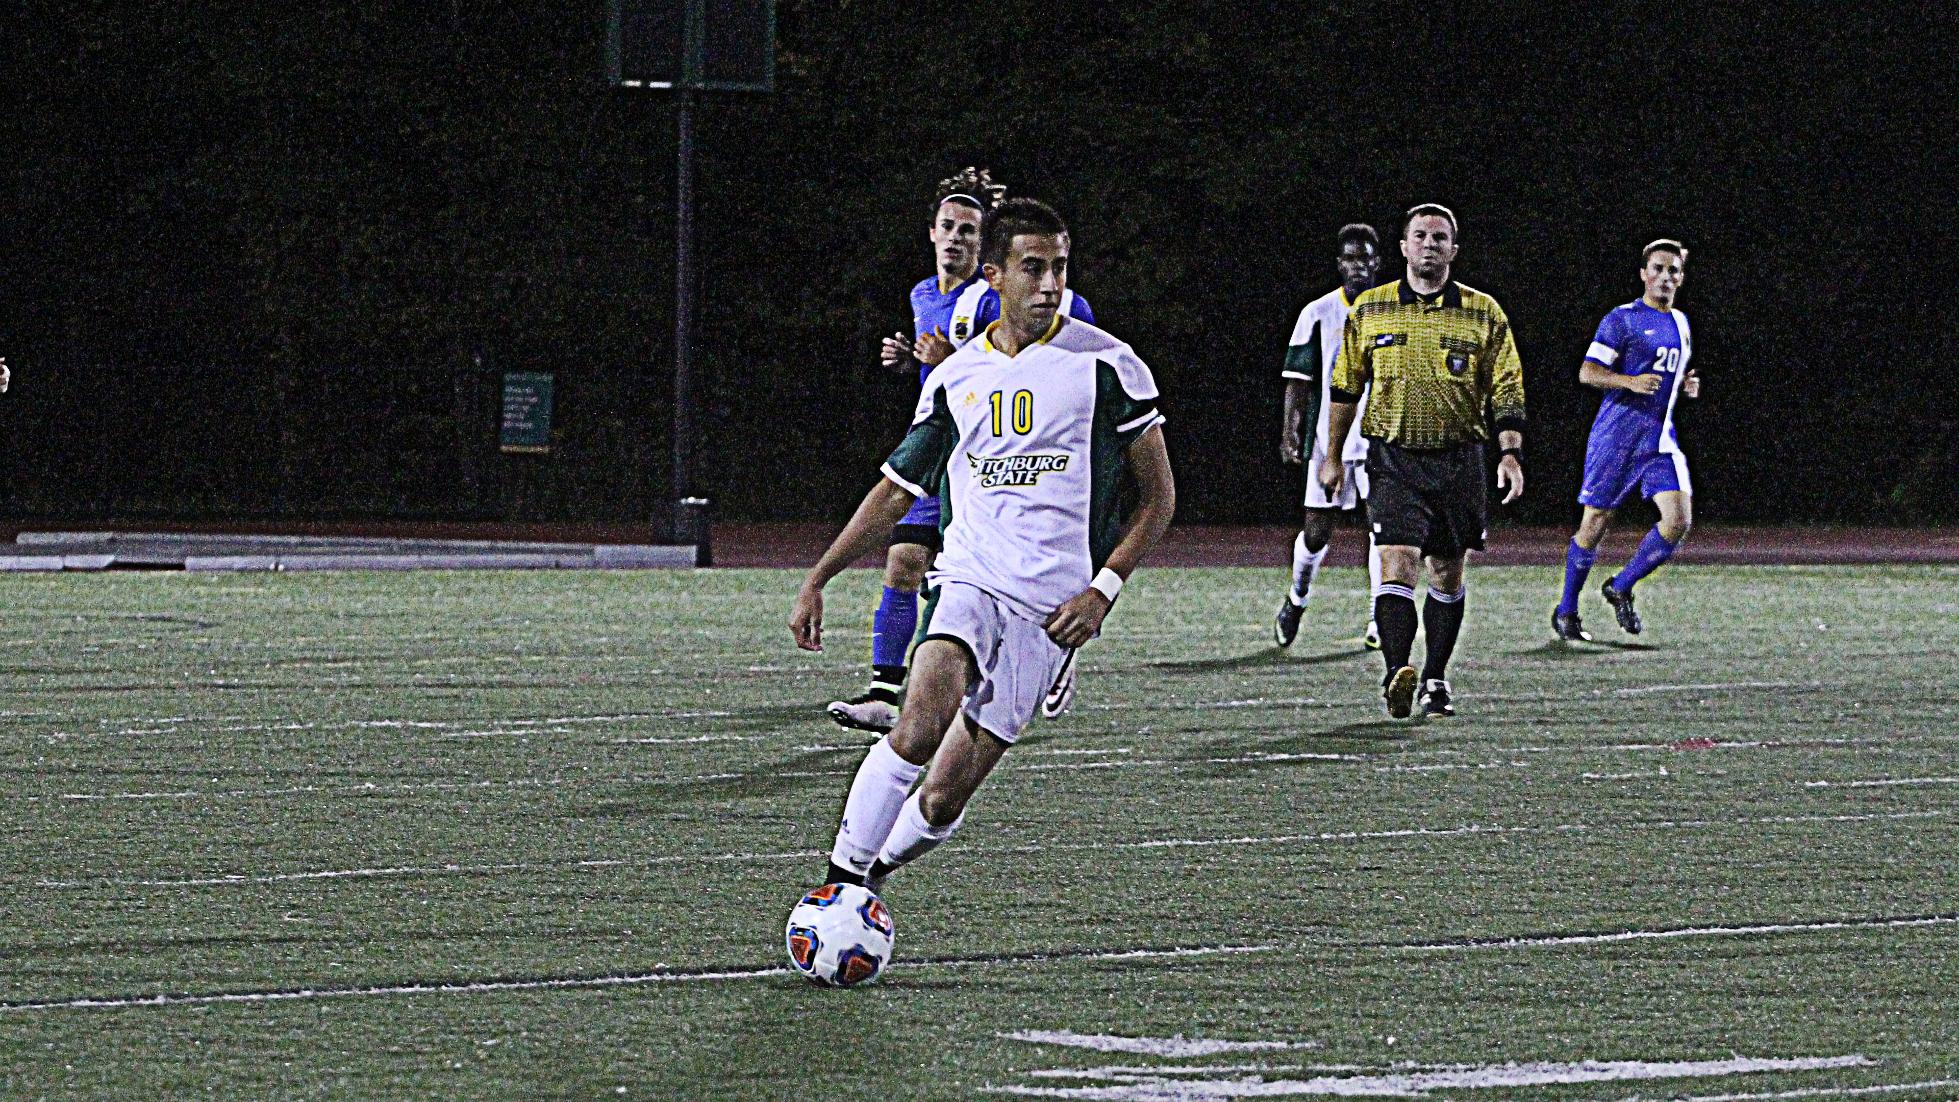 Falcons Upend Bridgewater State, 2-1